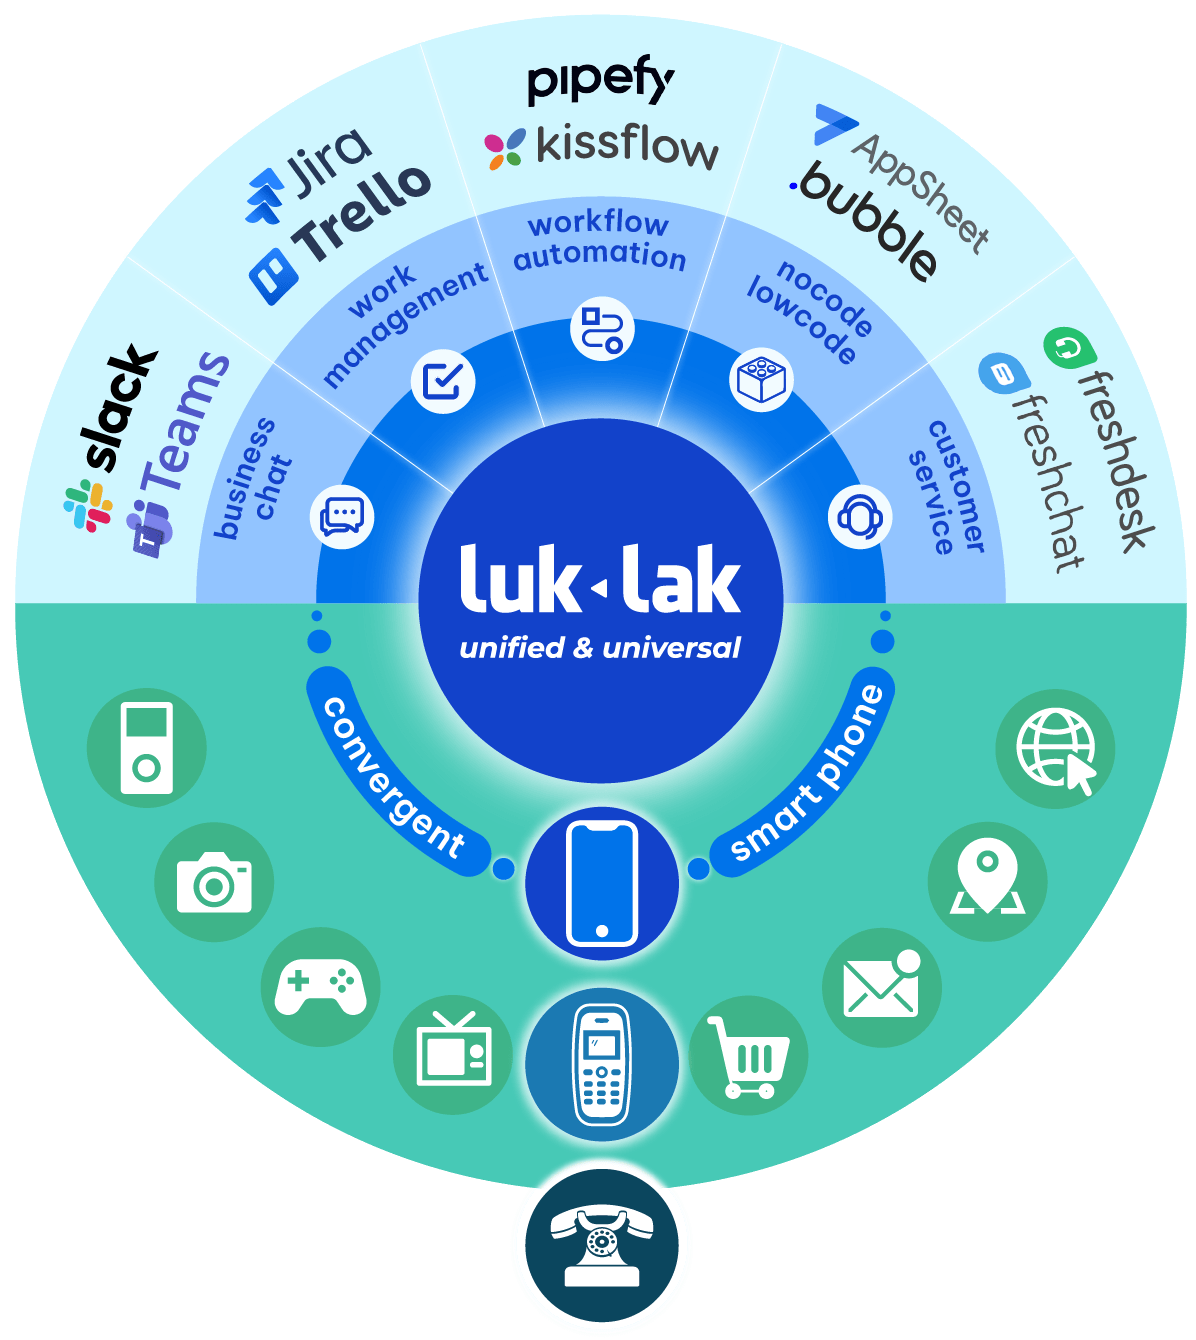 luklak thay thế 5 dòng sản phẩm: business chat, work management, workflow automation, nocode & lowcode, customer service